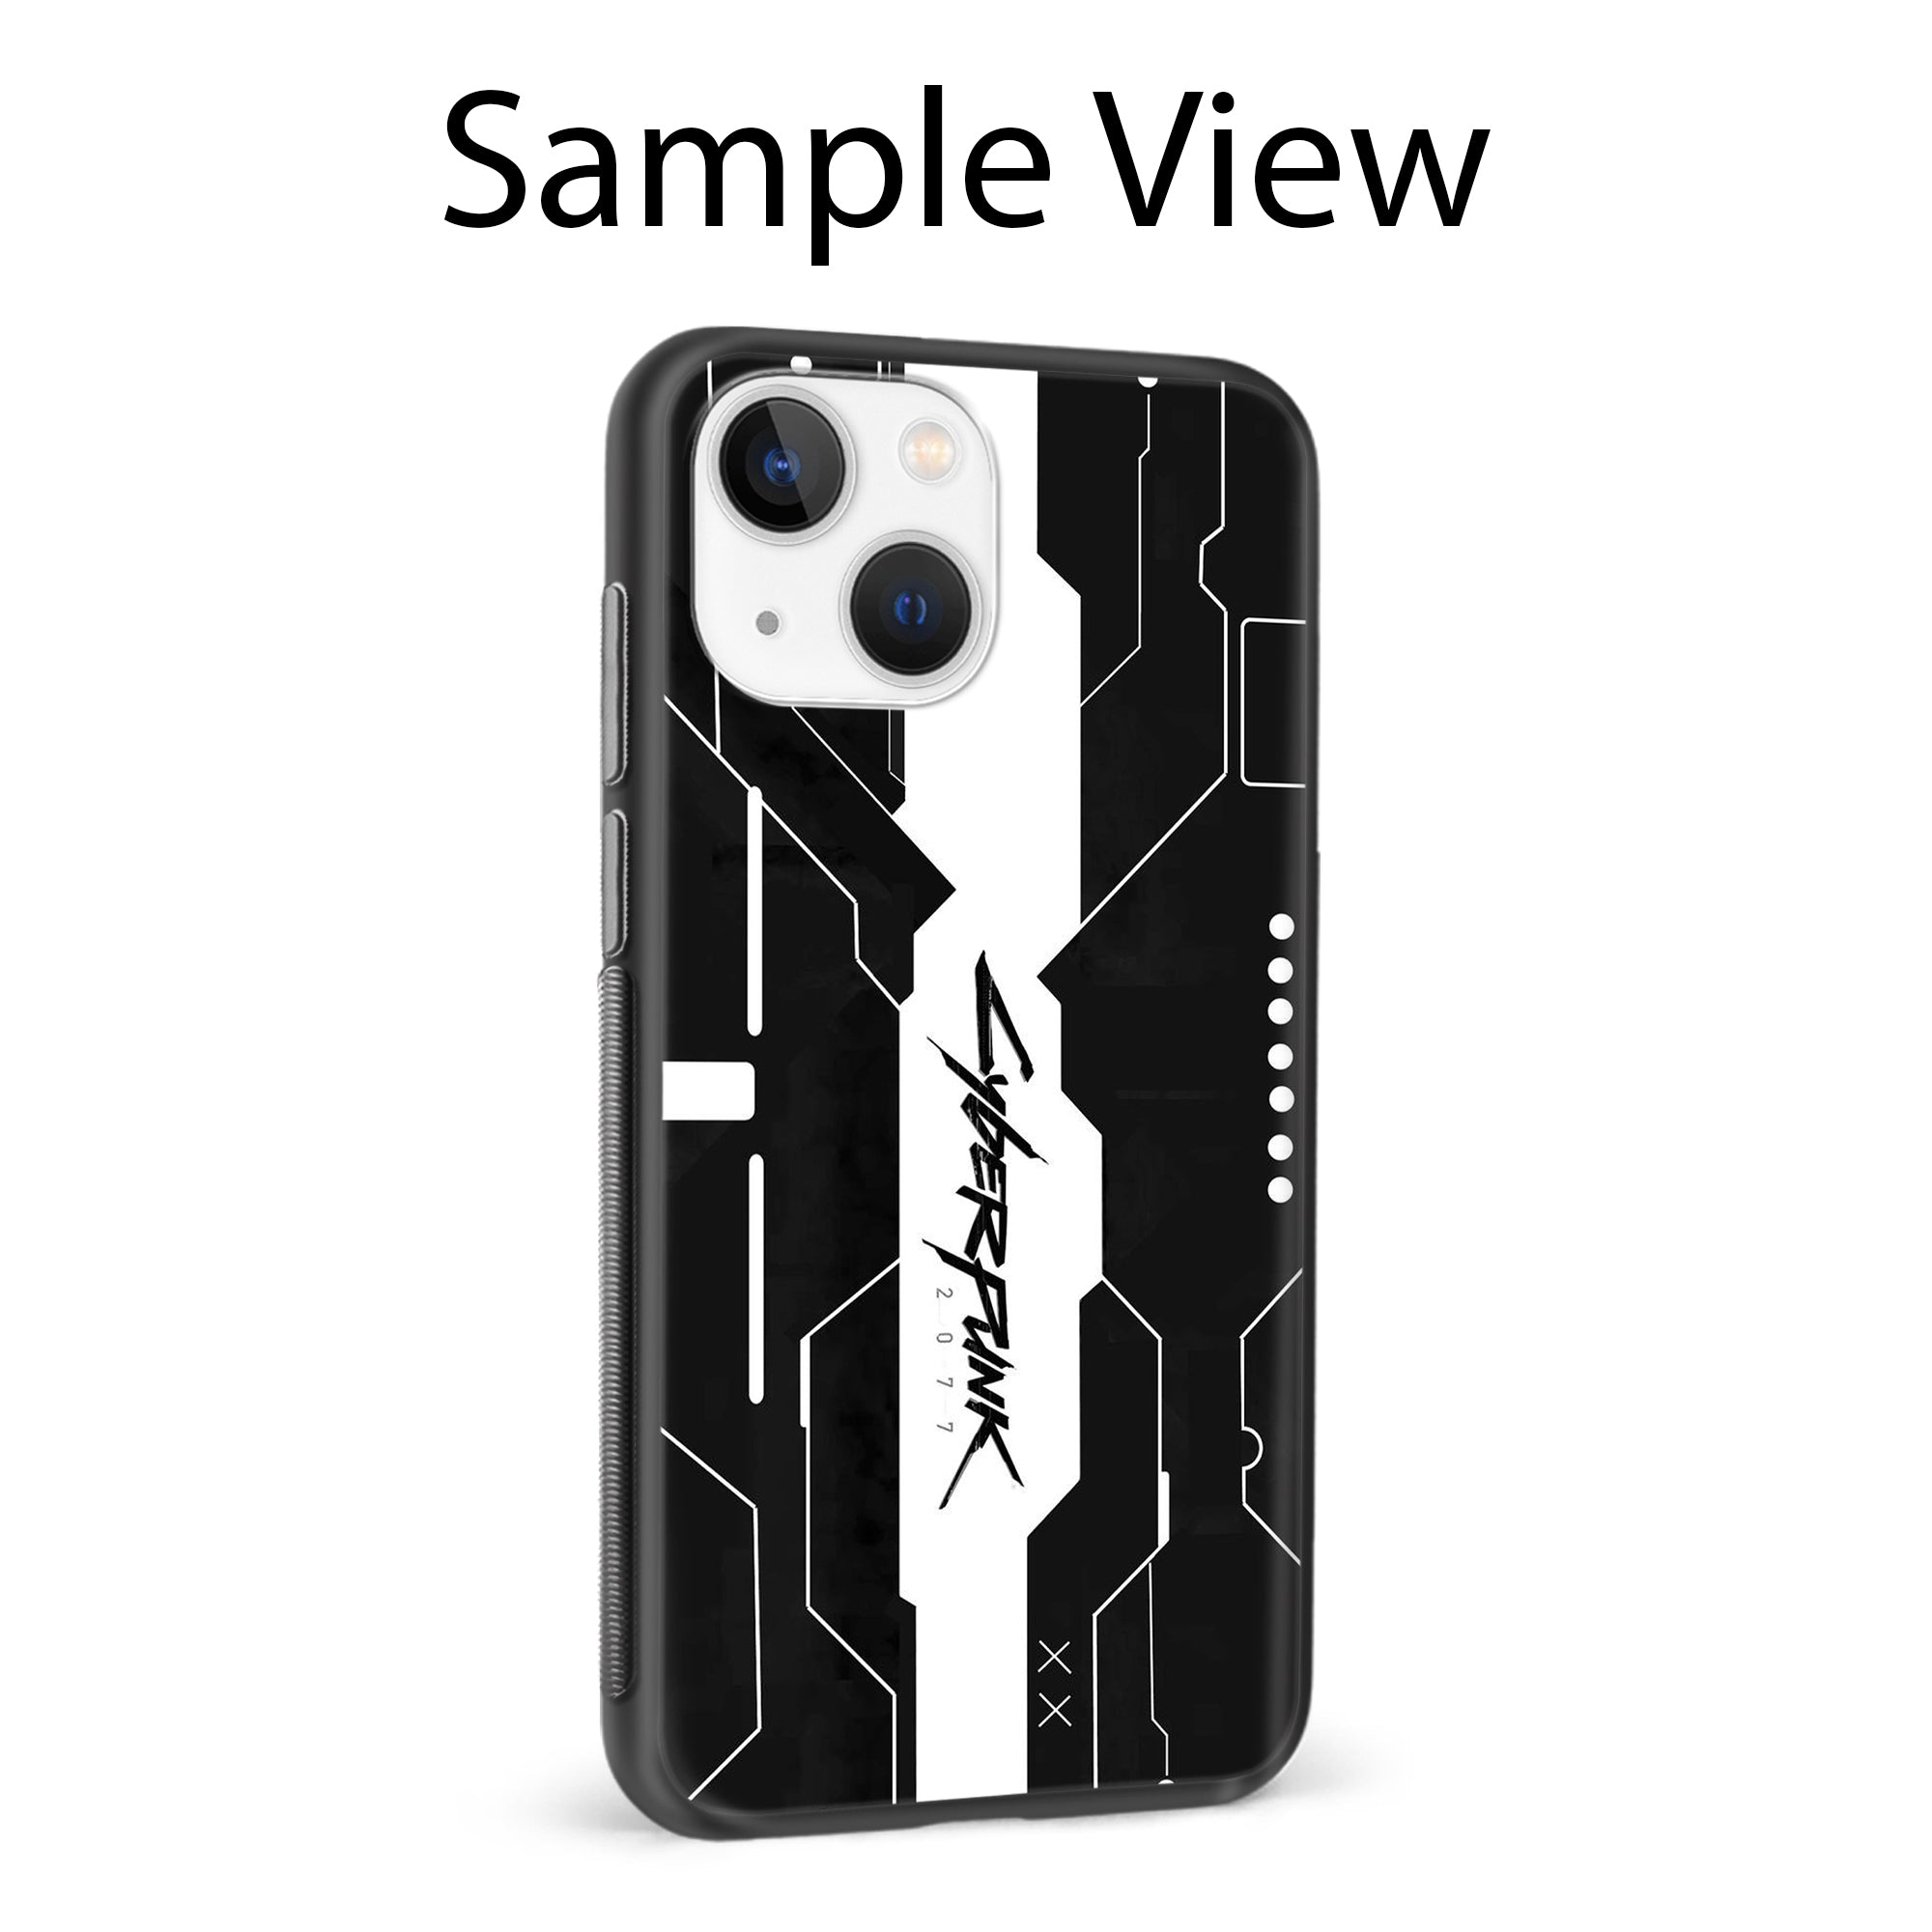 Buy Cyberpunk 2077 Art Metal-Silicon Back Mobile Phone Case/Cover For Samsung Galaxy A72 Online